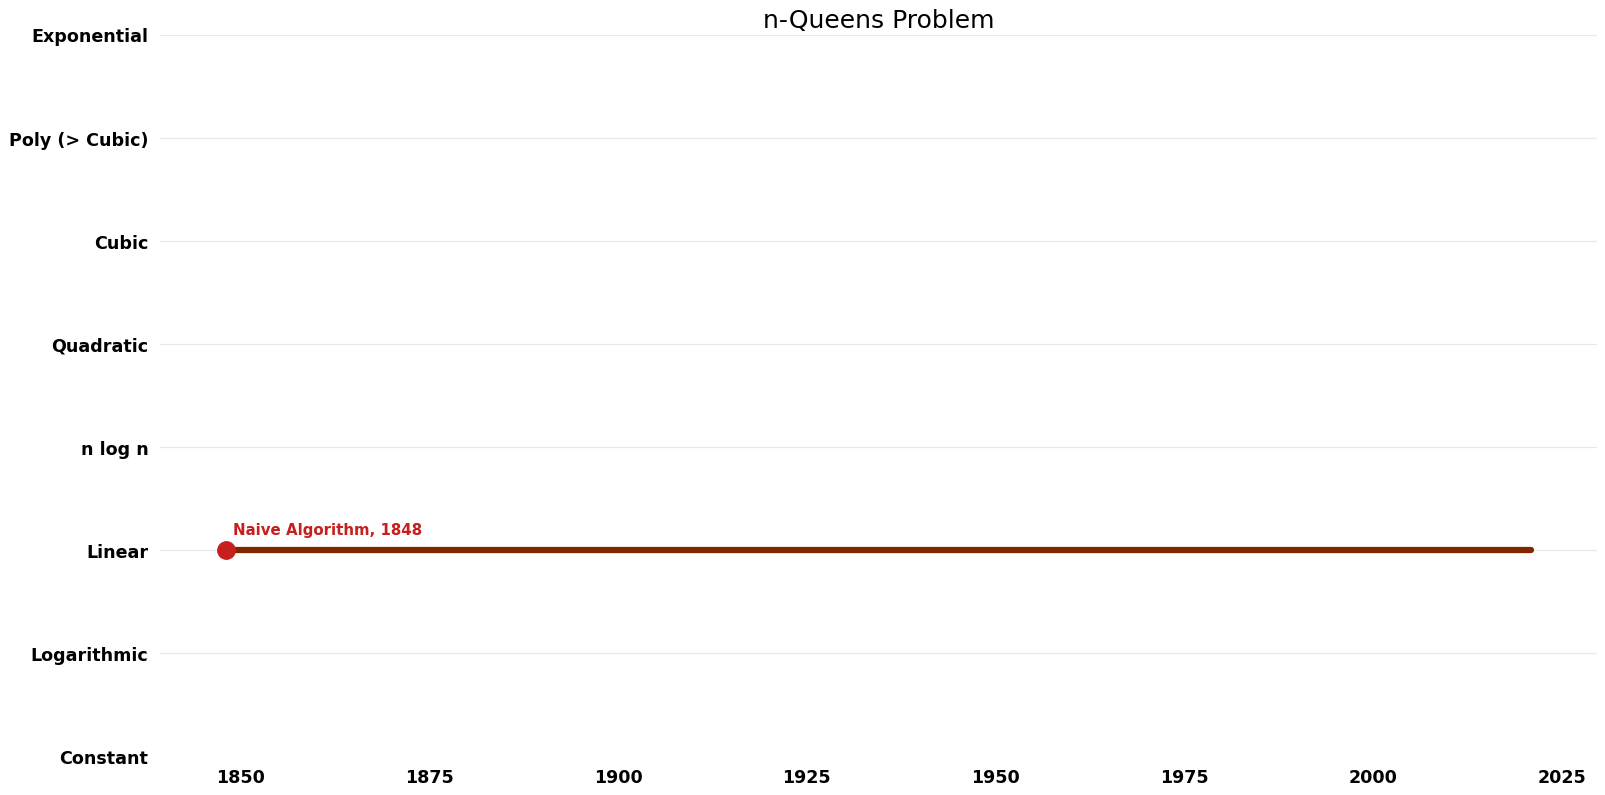 File:N-Queens Problem - Space.png